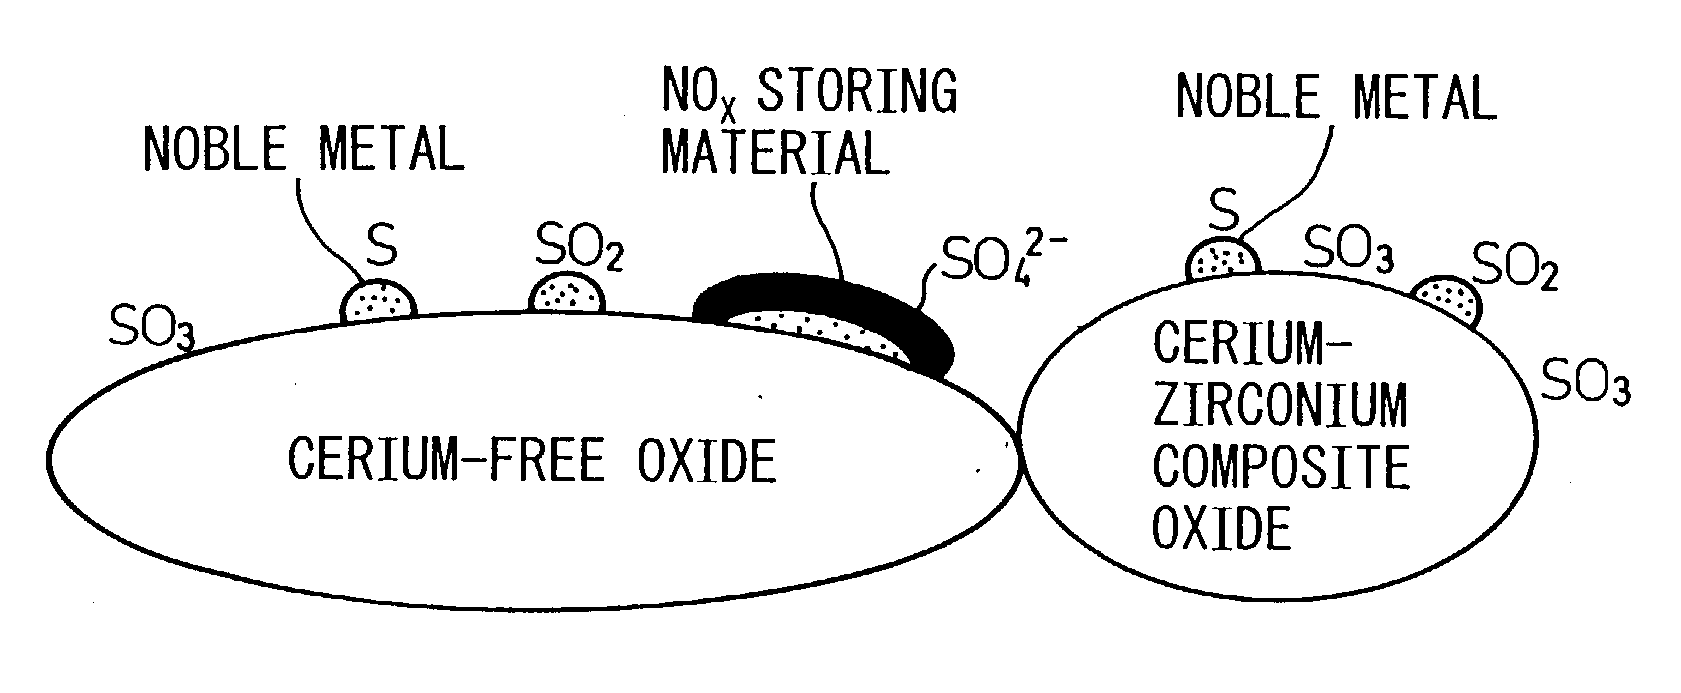 Storage-reduction type NOx purifying catalyst